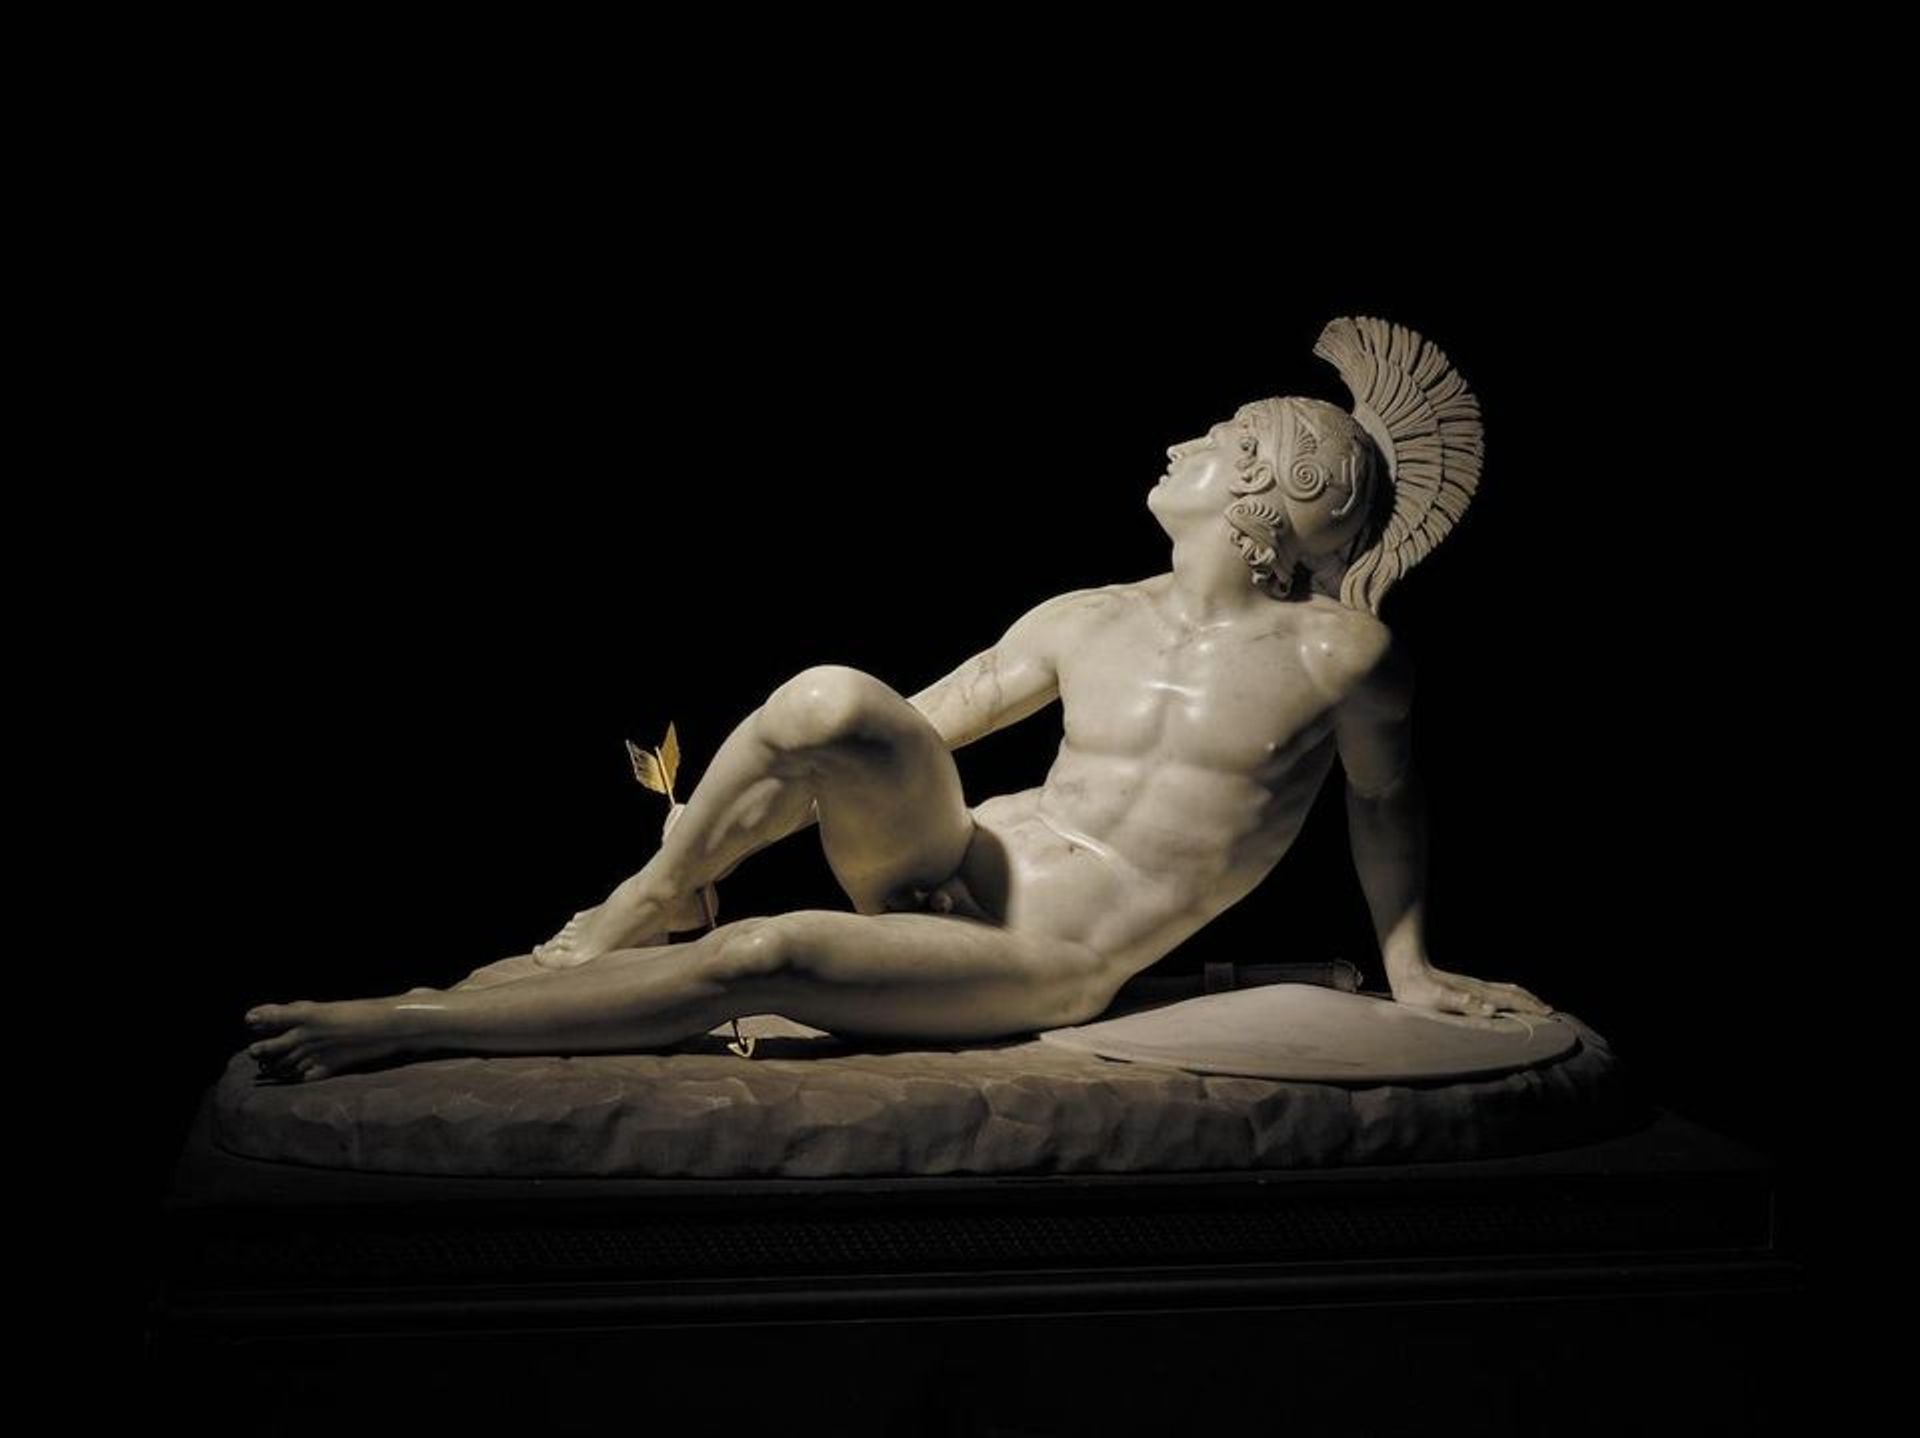 Filippo Albacini (1777-1858), The Wounded Achilles (1825) is on show at the British Museum Photograph © The Devonshire Collections, Chatsworth. Reproduced by permission of Chatsworth Settlement Trustees